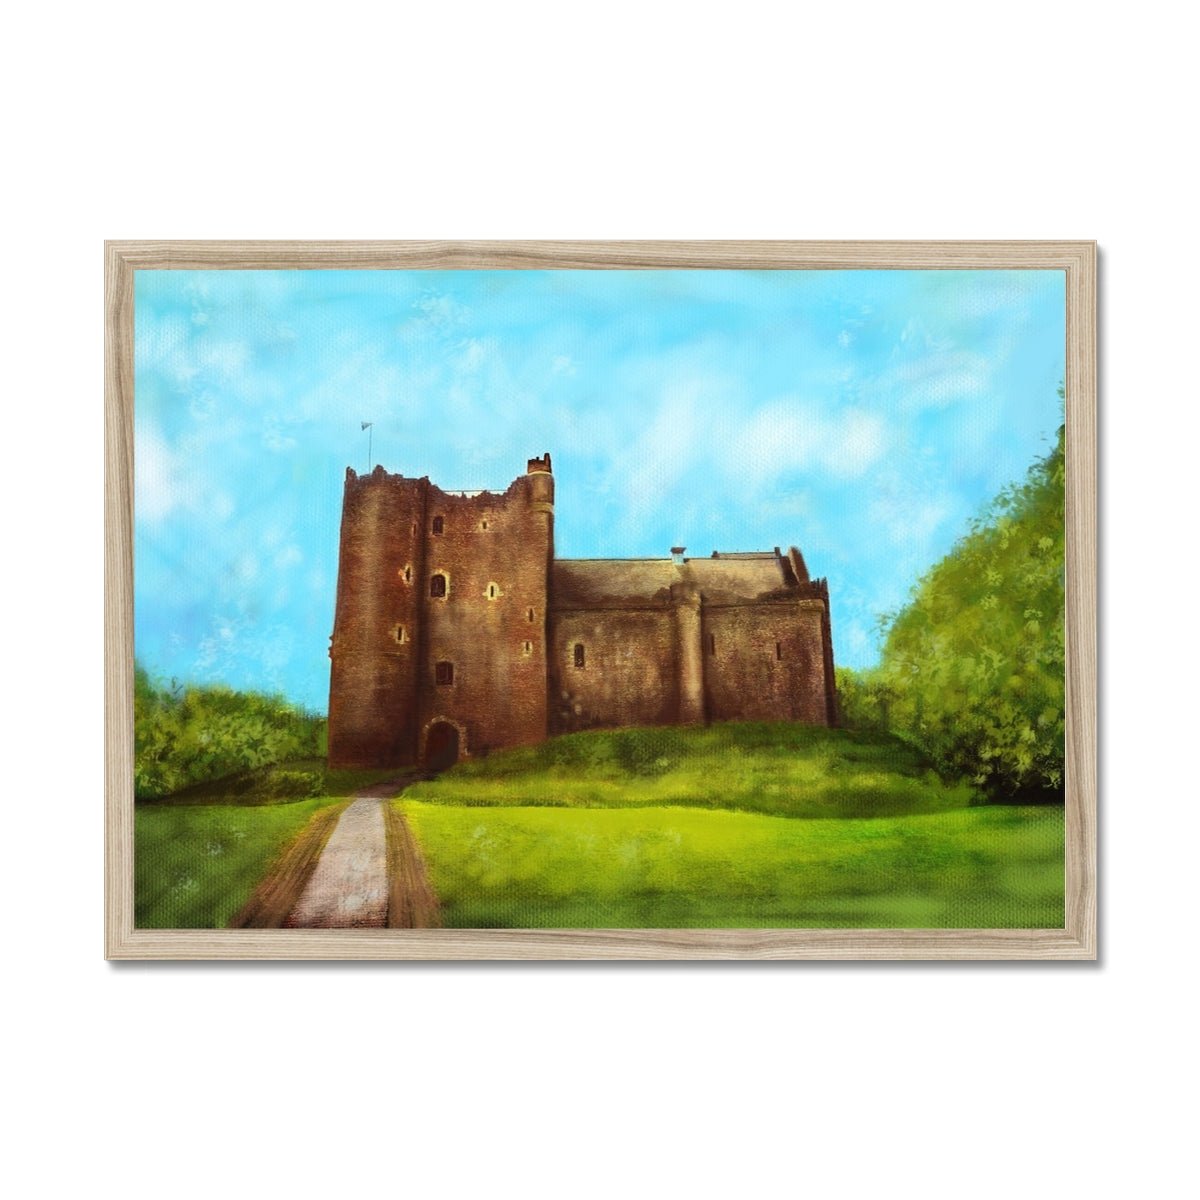 Doune Castle Painting | Framed Prints From Scotland-Framed Prints-Scottish Castles Art Gallery-A2 Landscape-Natural Frame-Paintings, Prints, Homeware, Art Gifts From Scotland By Scottish Artist Kevin Hunter